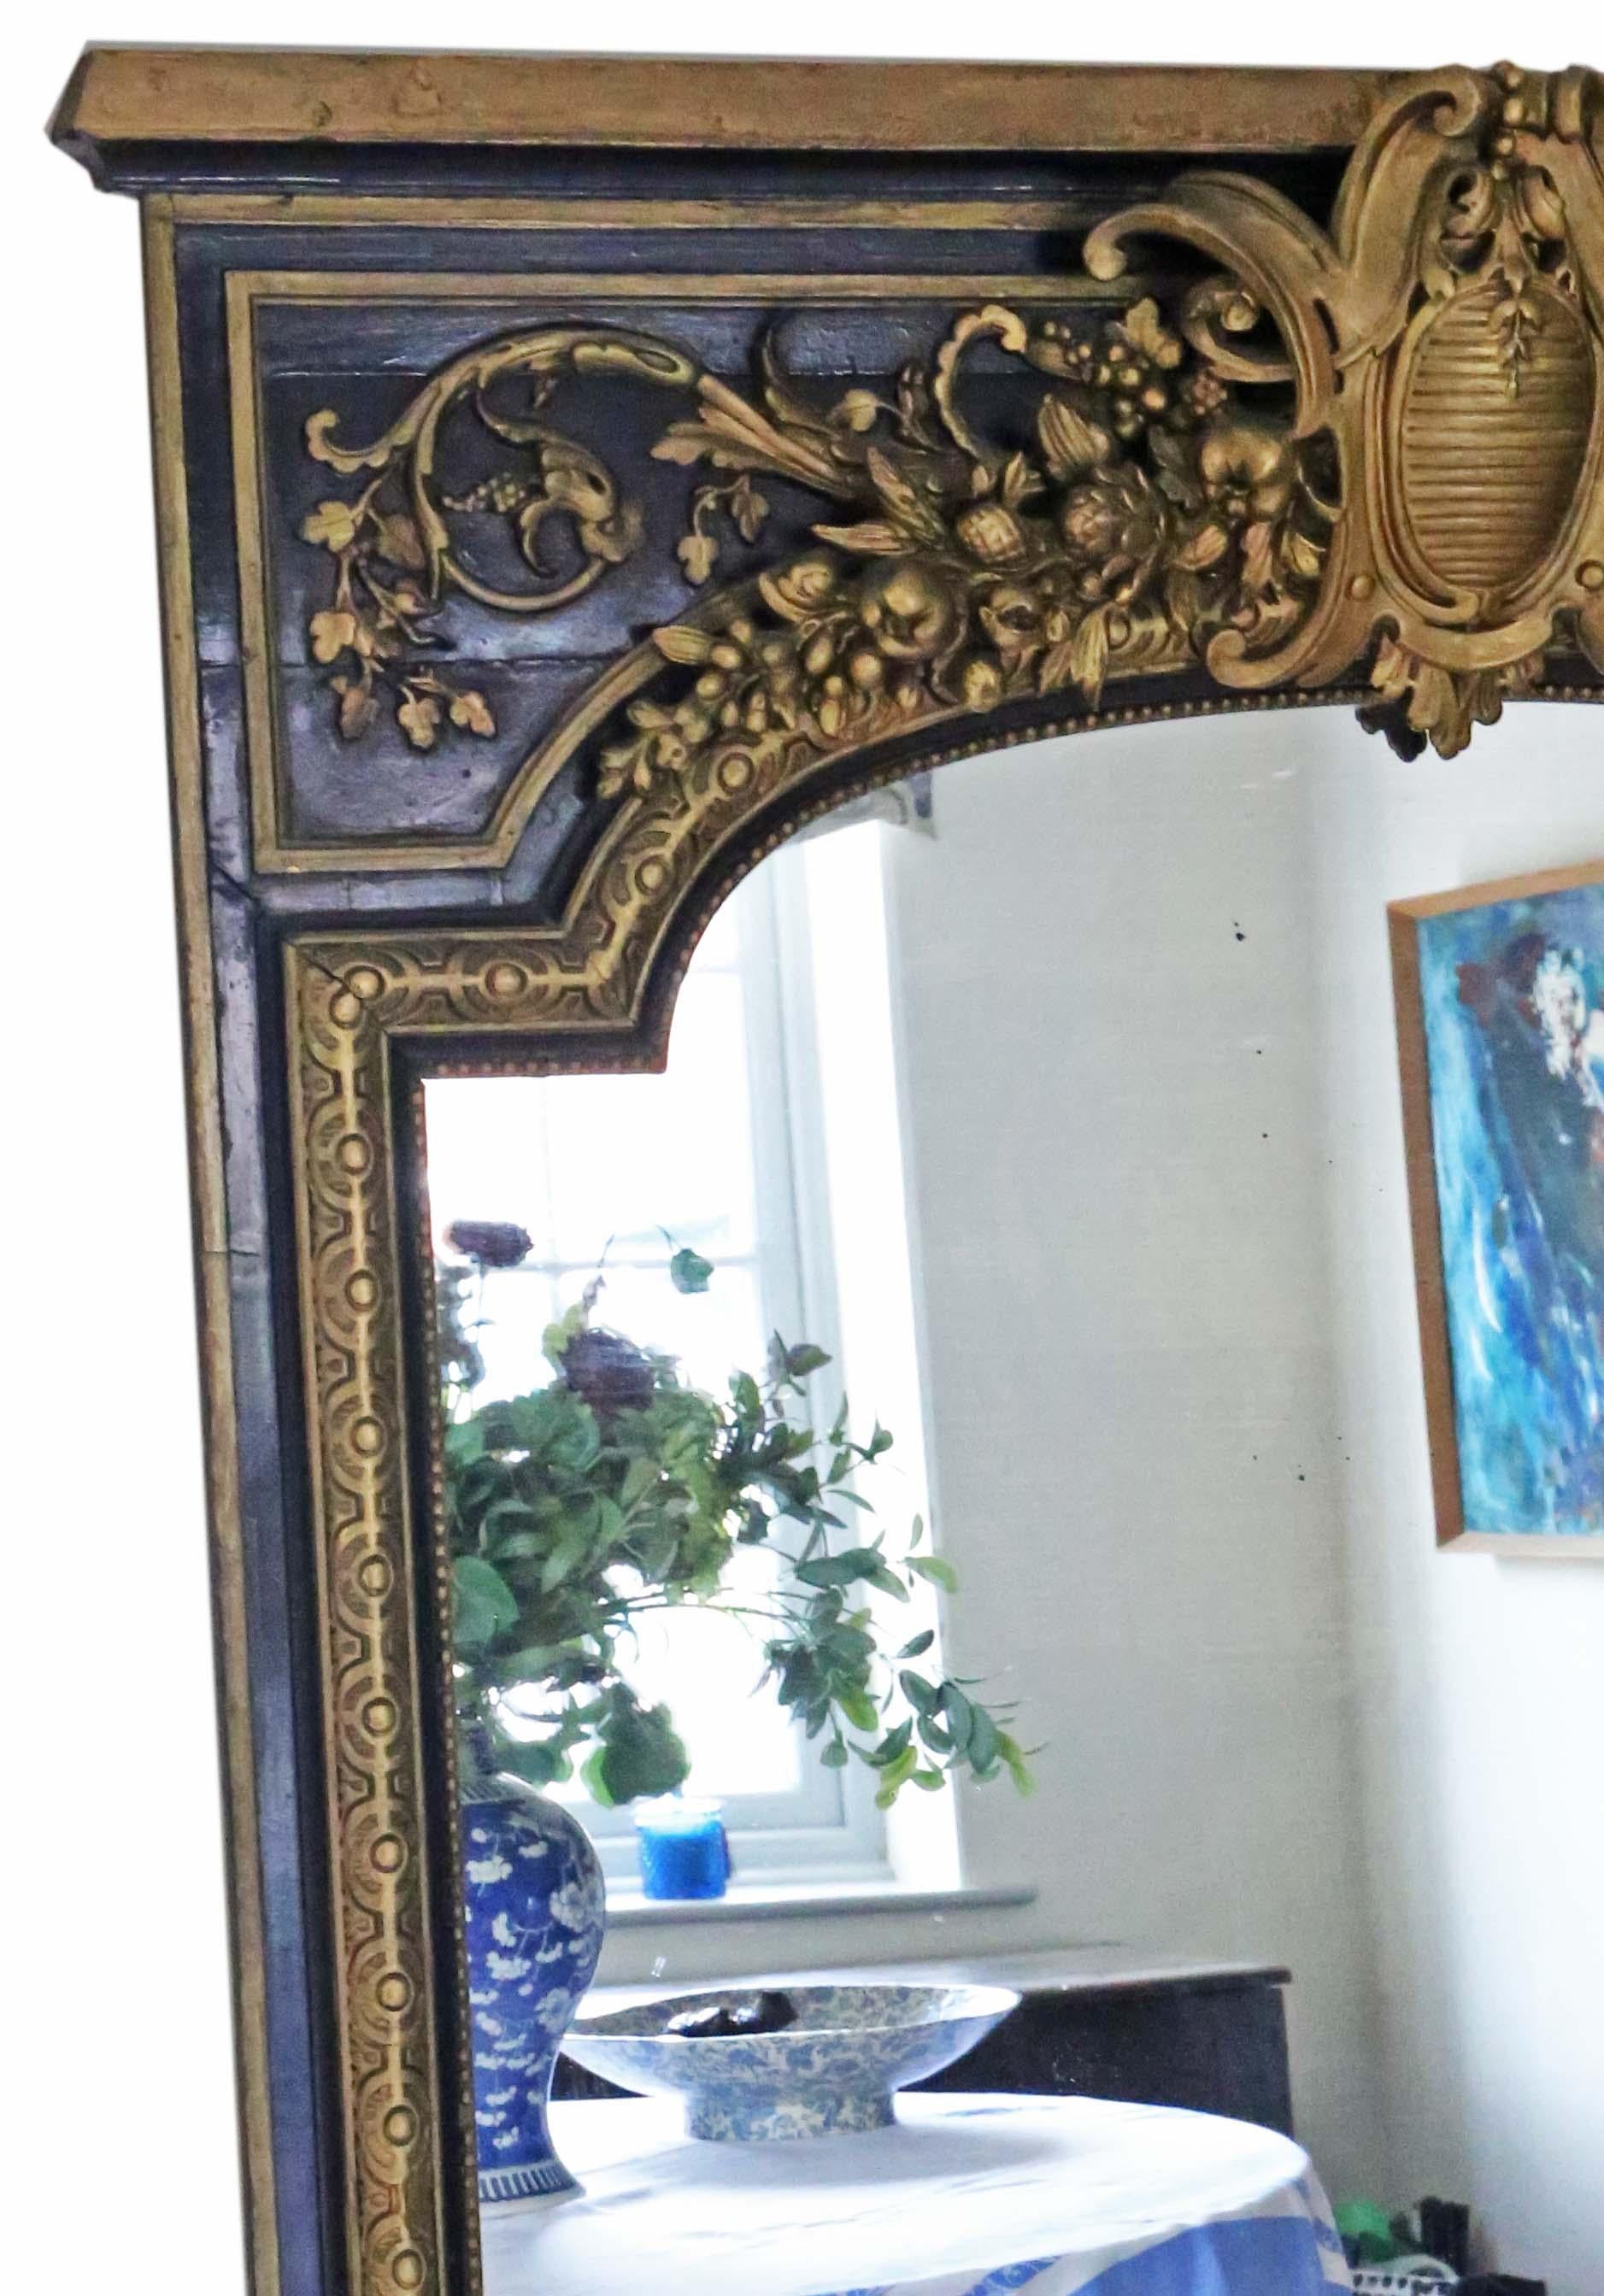 Antique 19th century very large quality ebonized and gilt floor wall overmantle mirror.

An impressive rare find, that would look amazing in the right location. No loose joints or woodworm.

The original mirrored glass has light oxidation, some